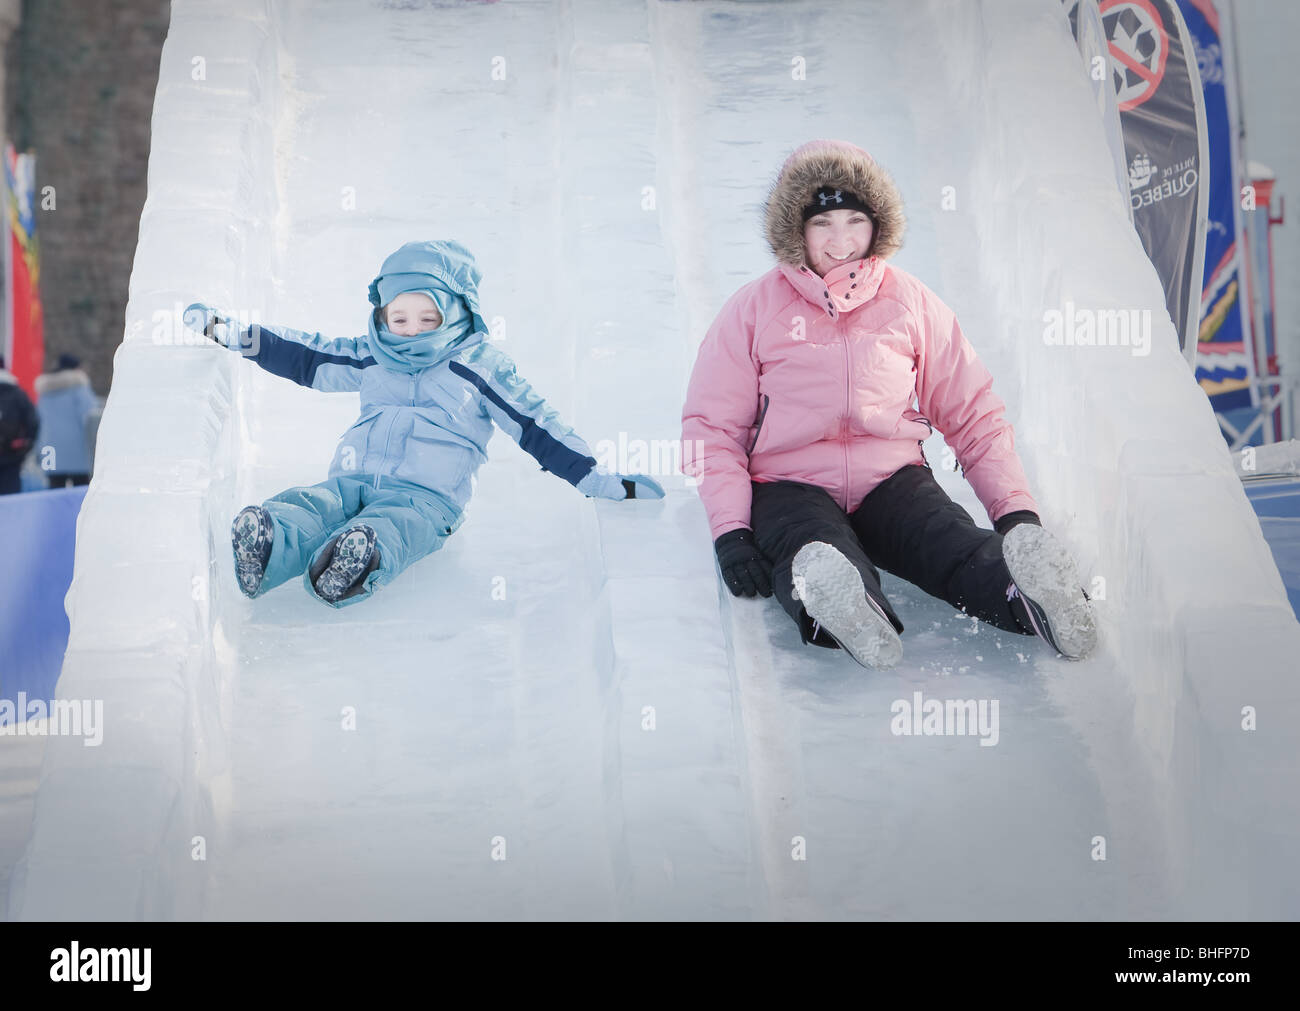 A woman and her daughter ride an ice slide at the Quebec Winter Carnival (Carnaval de Quebec) in Quebec city. Stock Photo